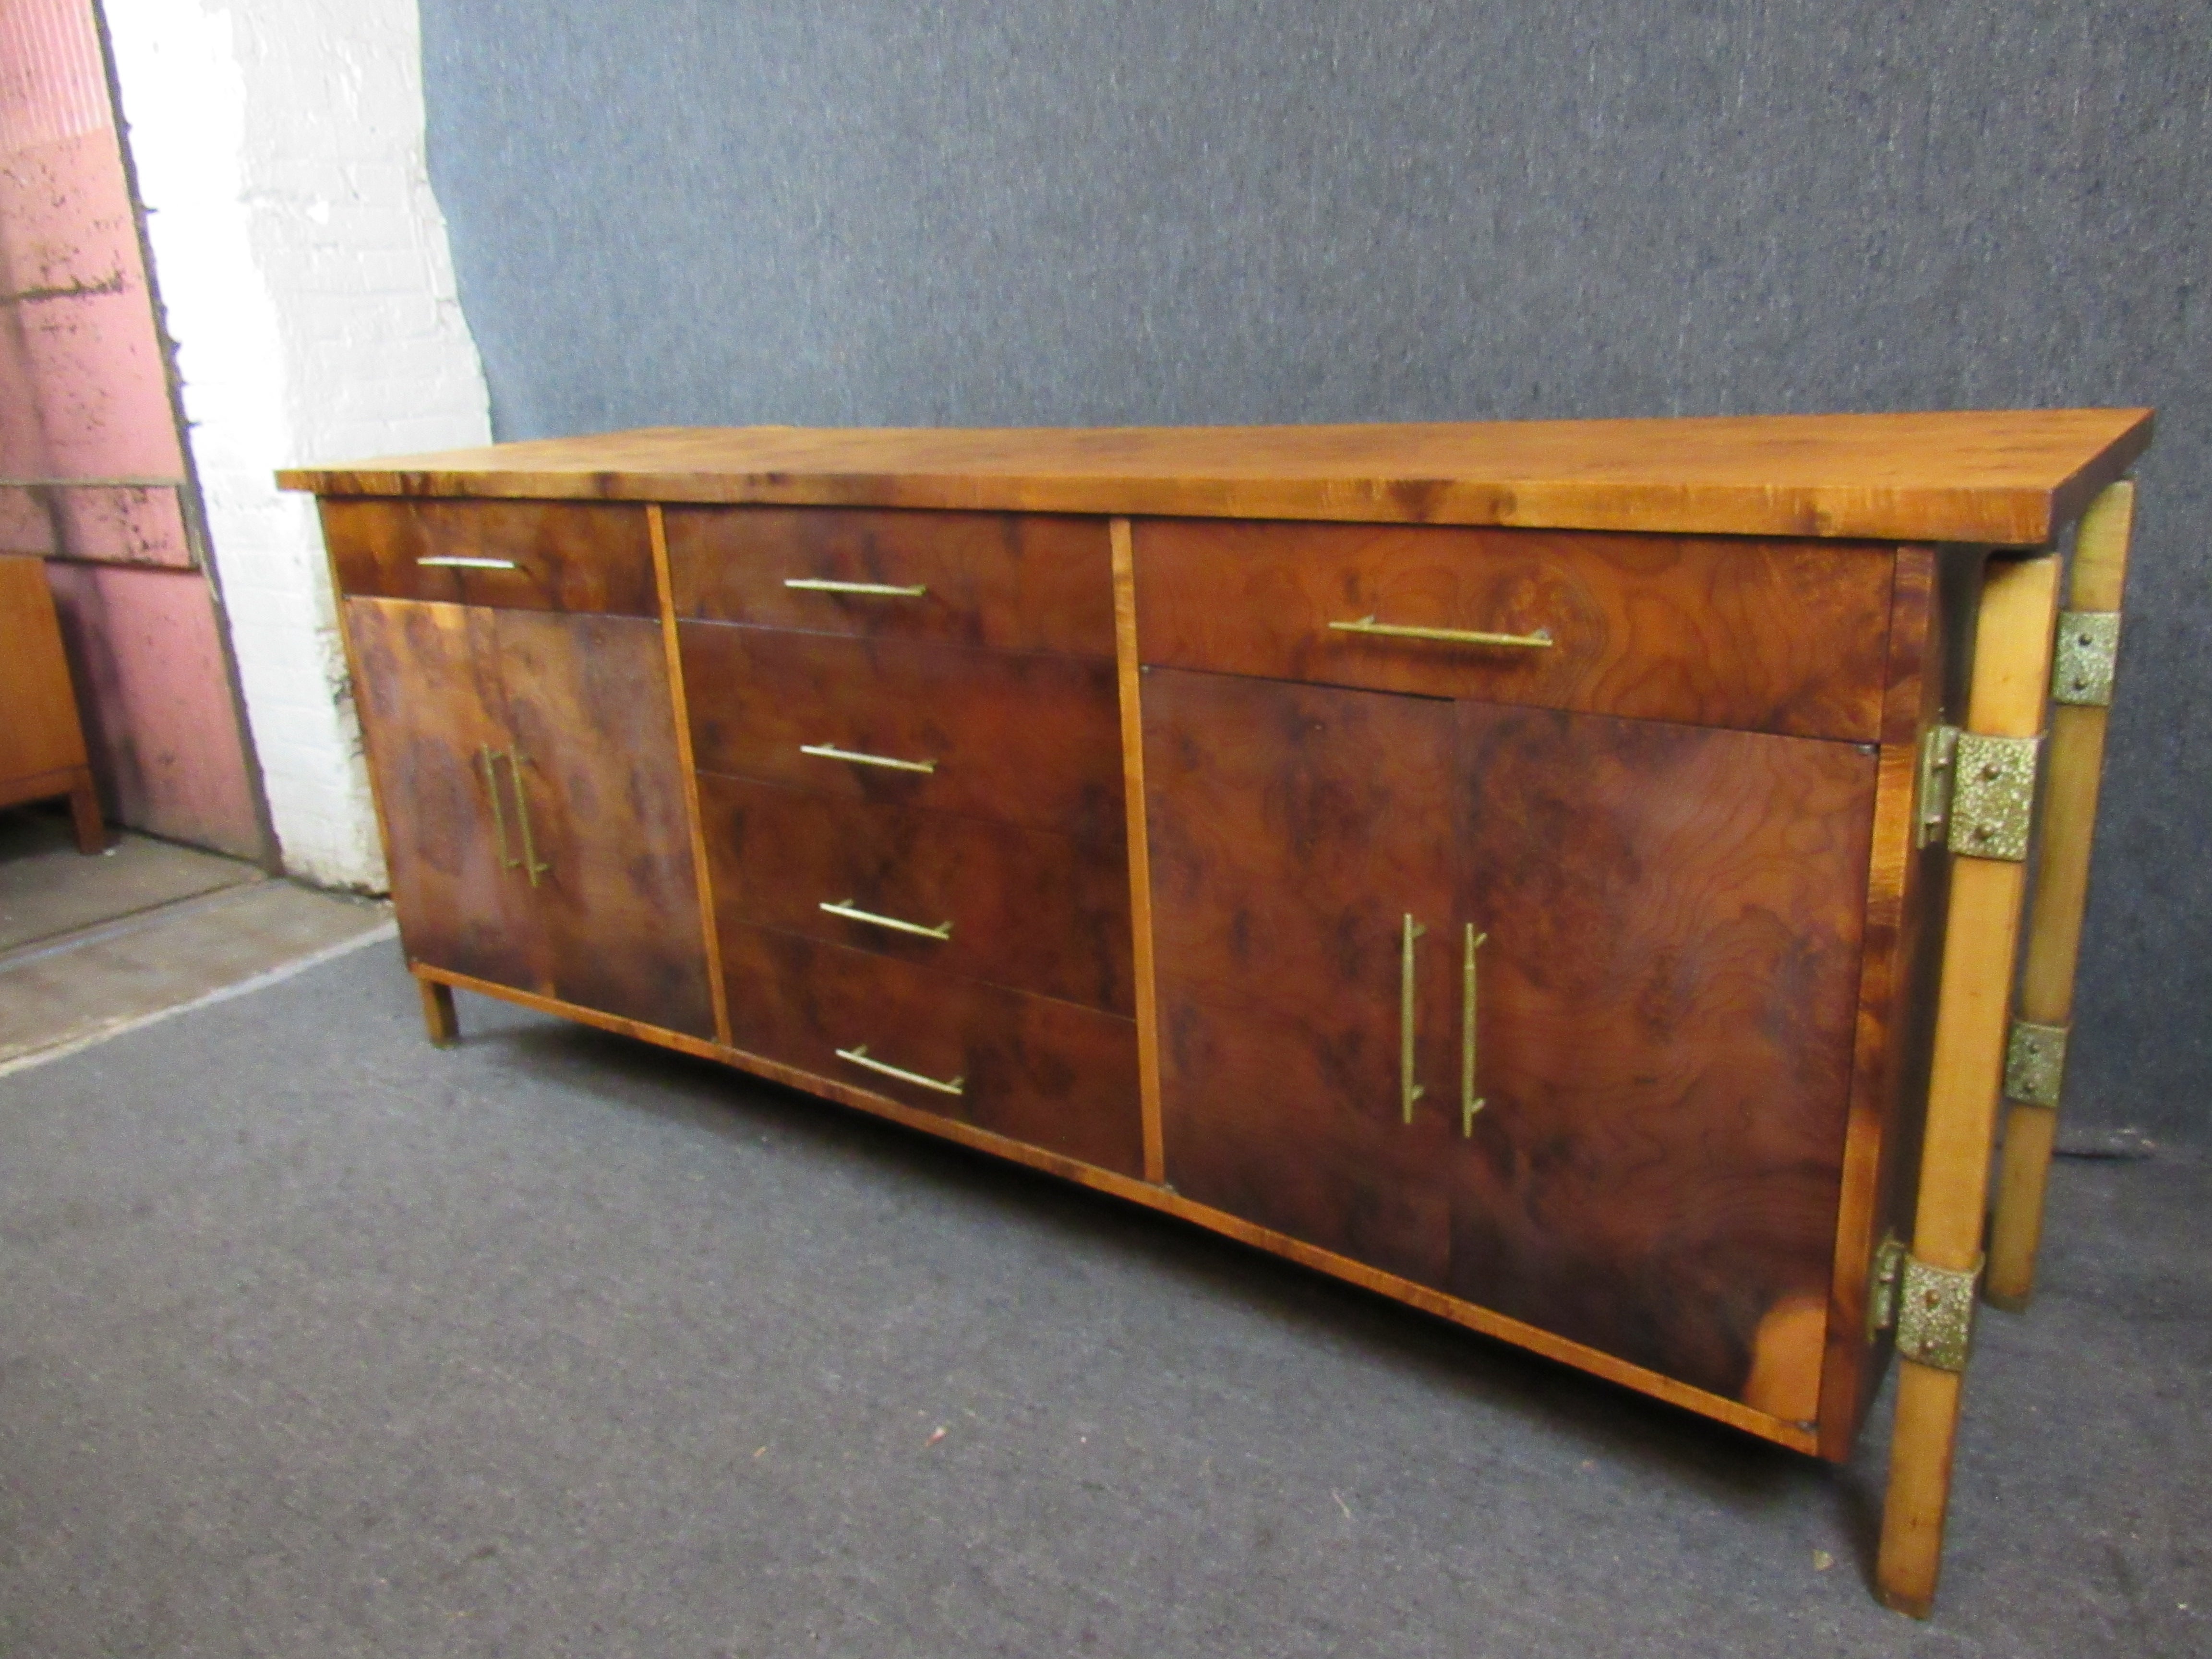 Gorgeous mid-century credenza from the highly regarded Romweber Furniture of Batesville, Indiana. Stunning two-tone burl wood with brass accents is sure to be a statement piece in any room of the home or office. Twelve large, pull-out drawers